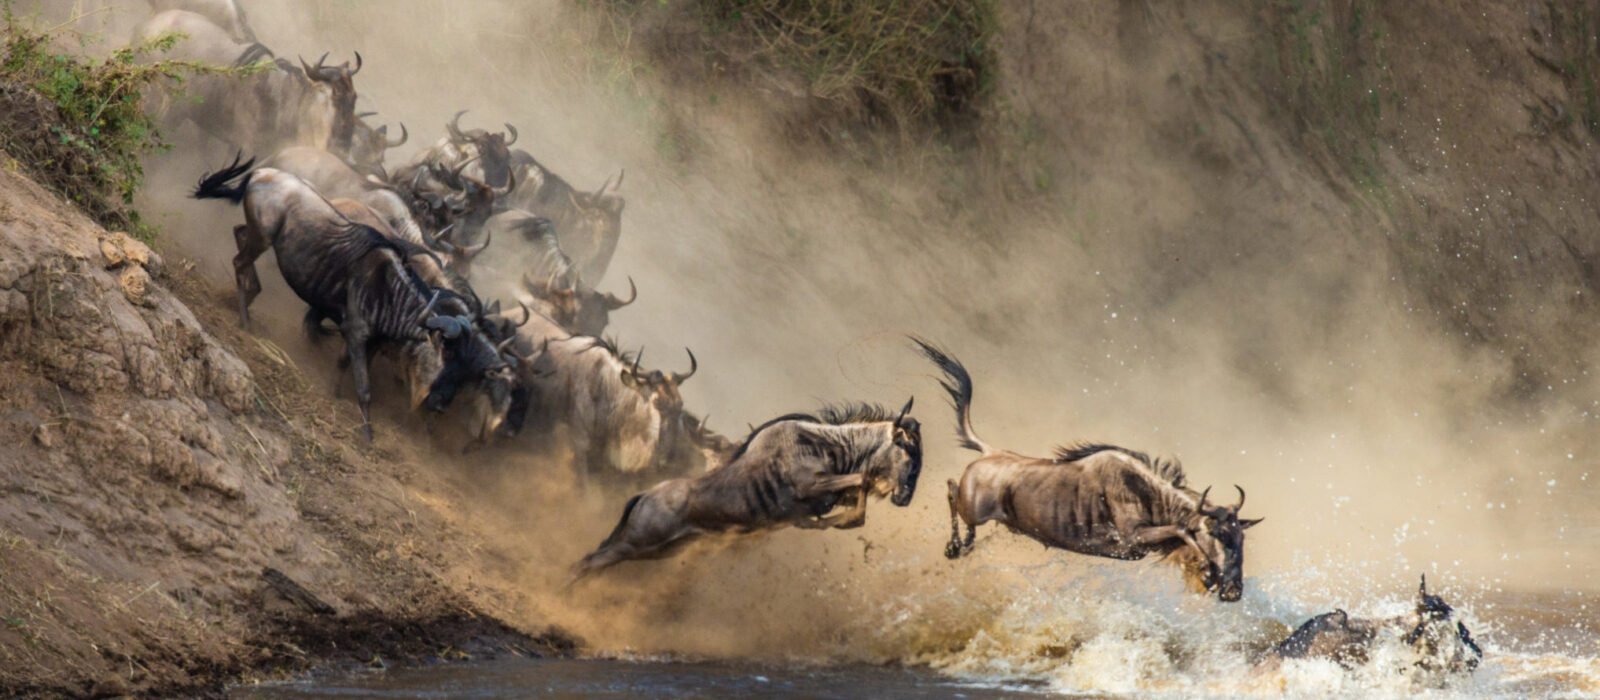 Wildebeest during the Great Migration on a river bank preparing to cross the river ibetween Tanzania and Kenya